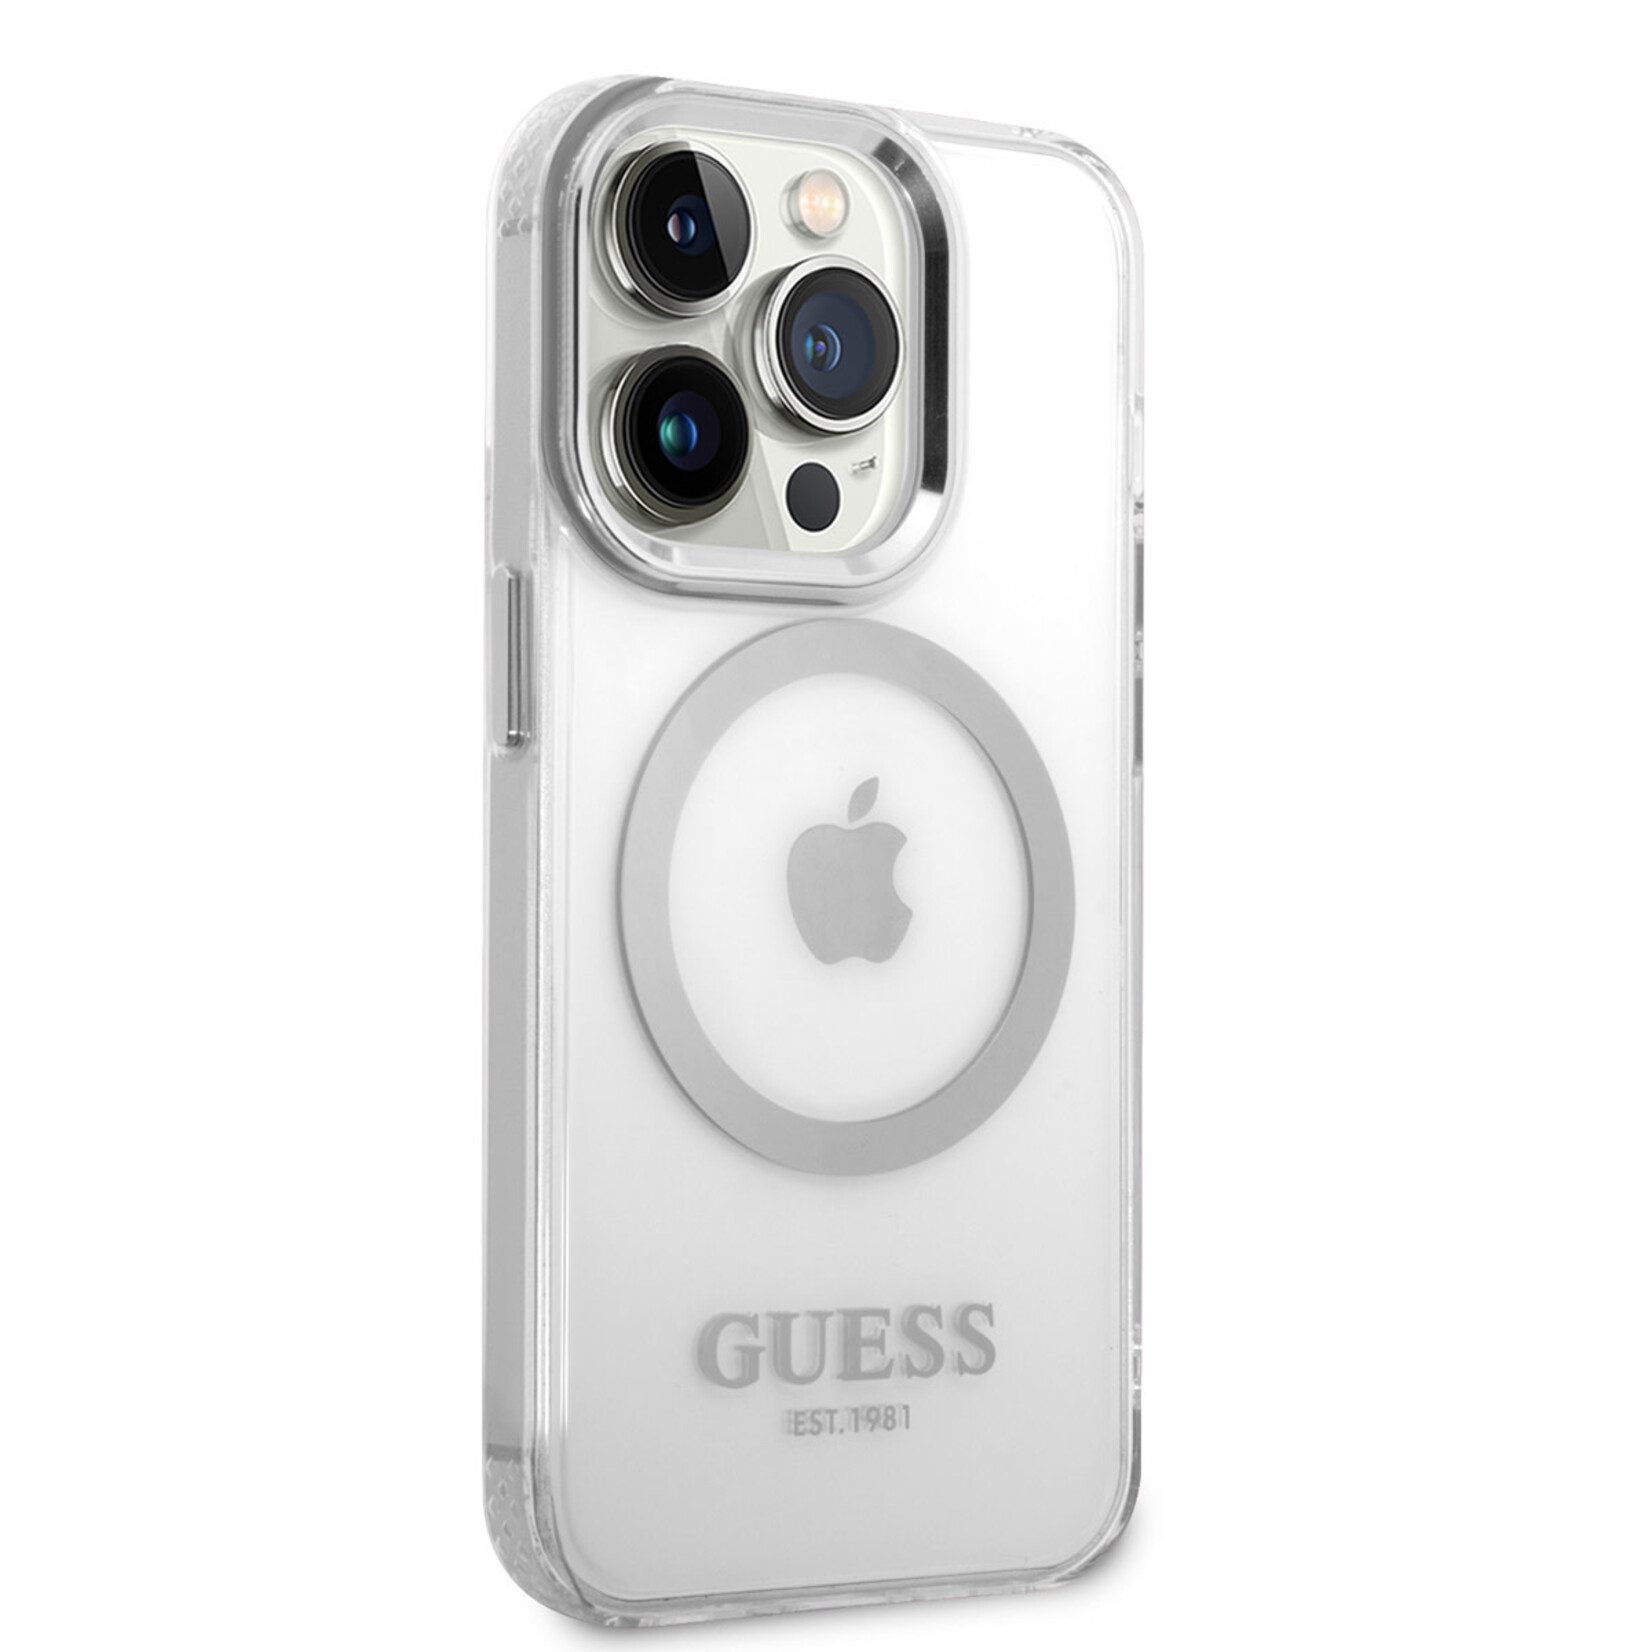 Guess Guess Apple iPhone 14 Pro Max TPU Back Cover Magsafe Telefoonhoesje - Zilver/Transparant - Bescherm je Telefoon